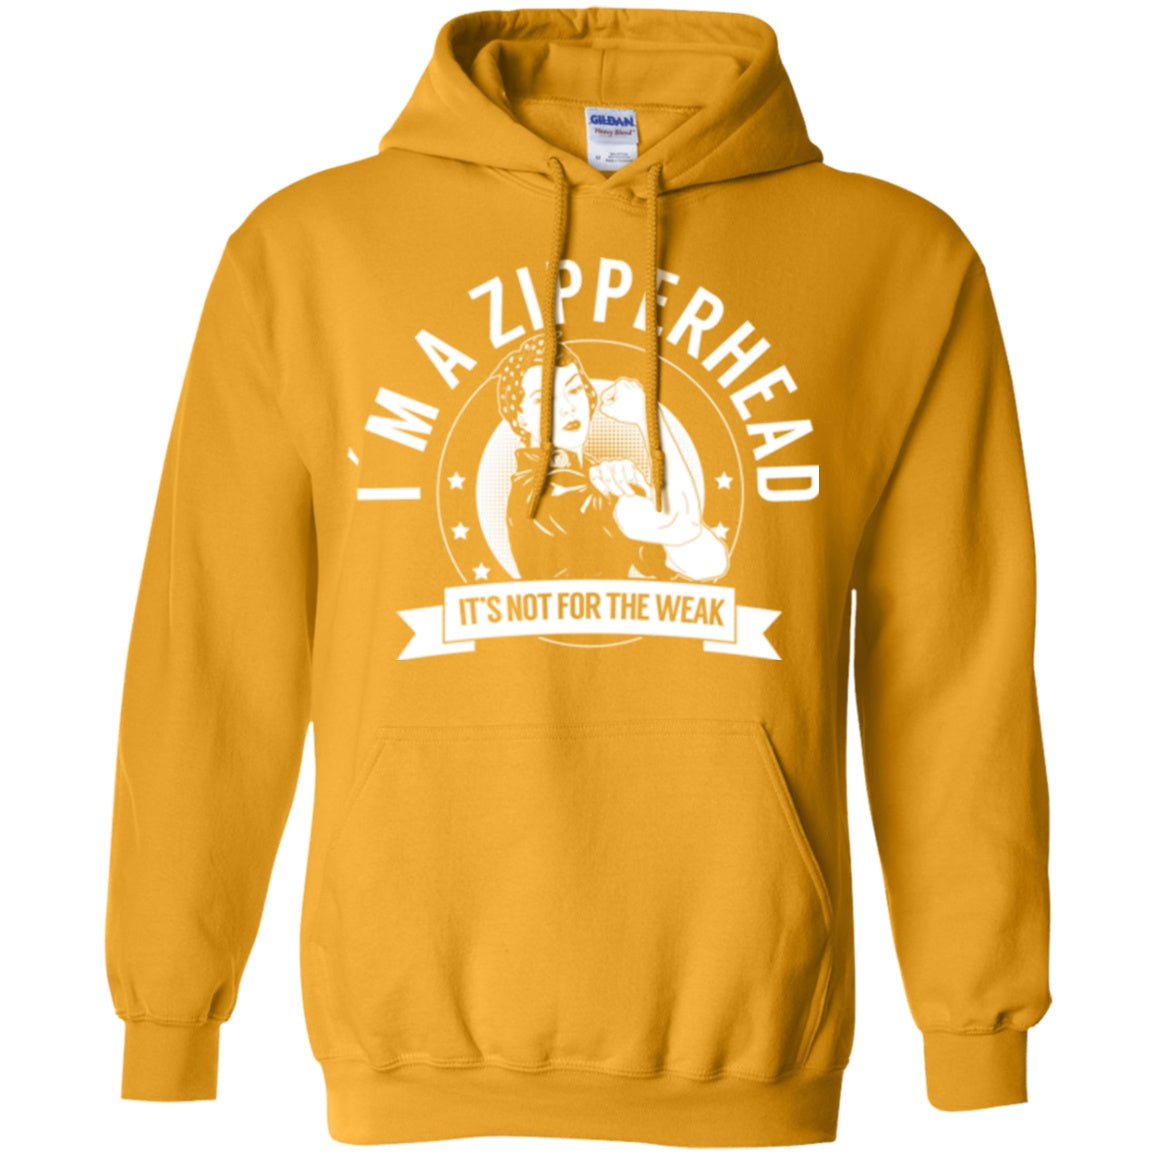 Zipperhead Not For The Weak Pullover Hoodie 8 oz. - The Unchargeables